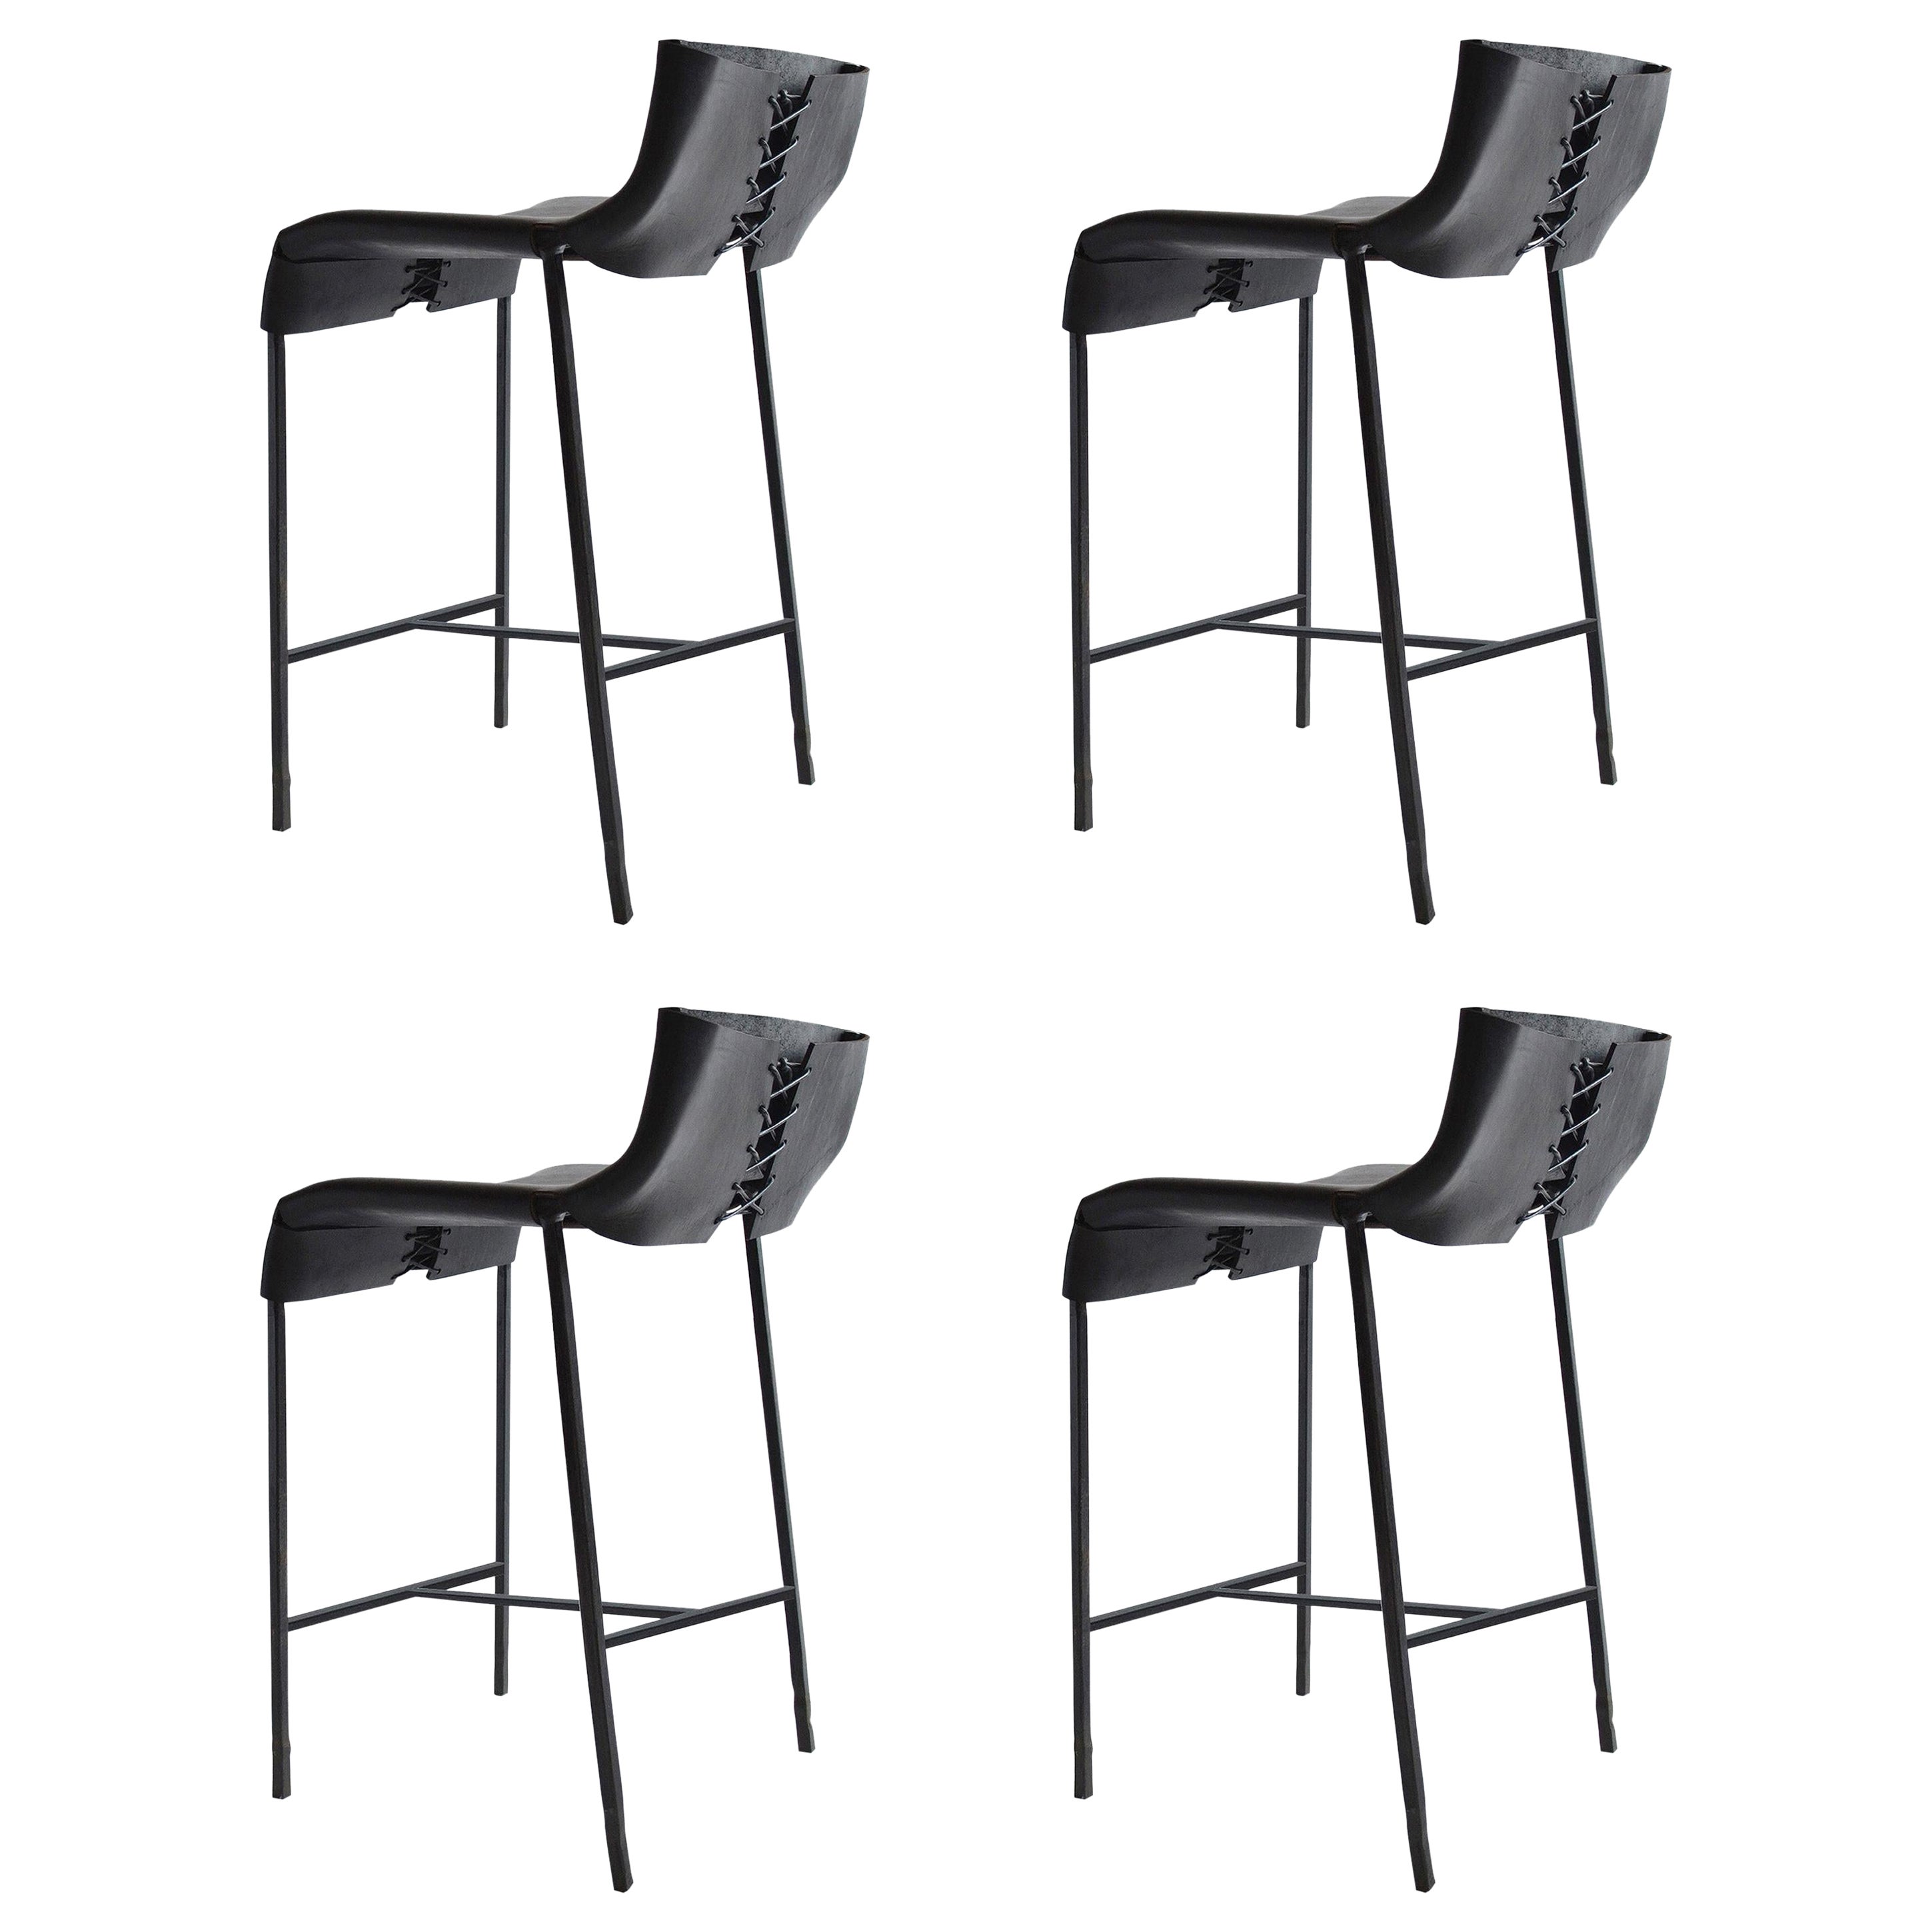 A Pair of Counter Stools - Blackened Steel and Leather